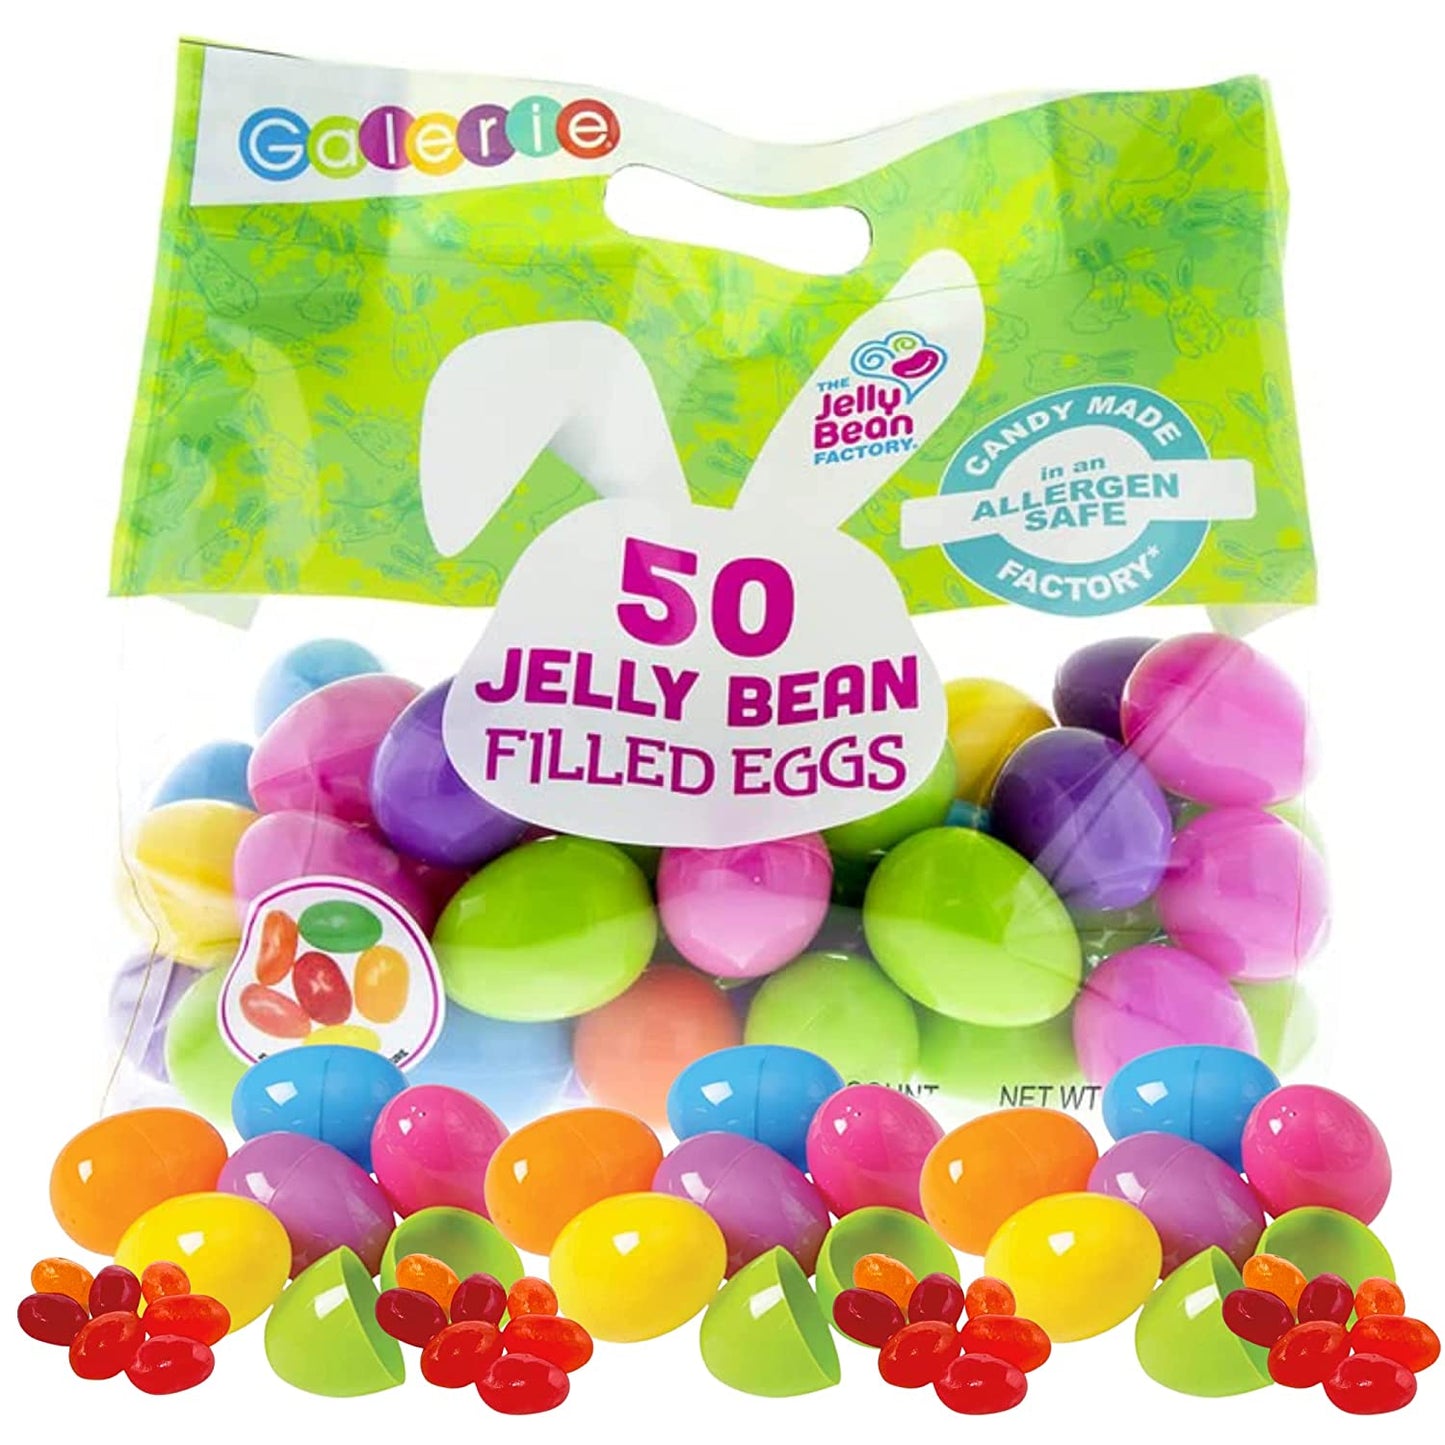 Bulk Plastic Candy Filled Easter Eggs, Jelly Beans, Assorted Bag of 50